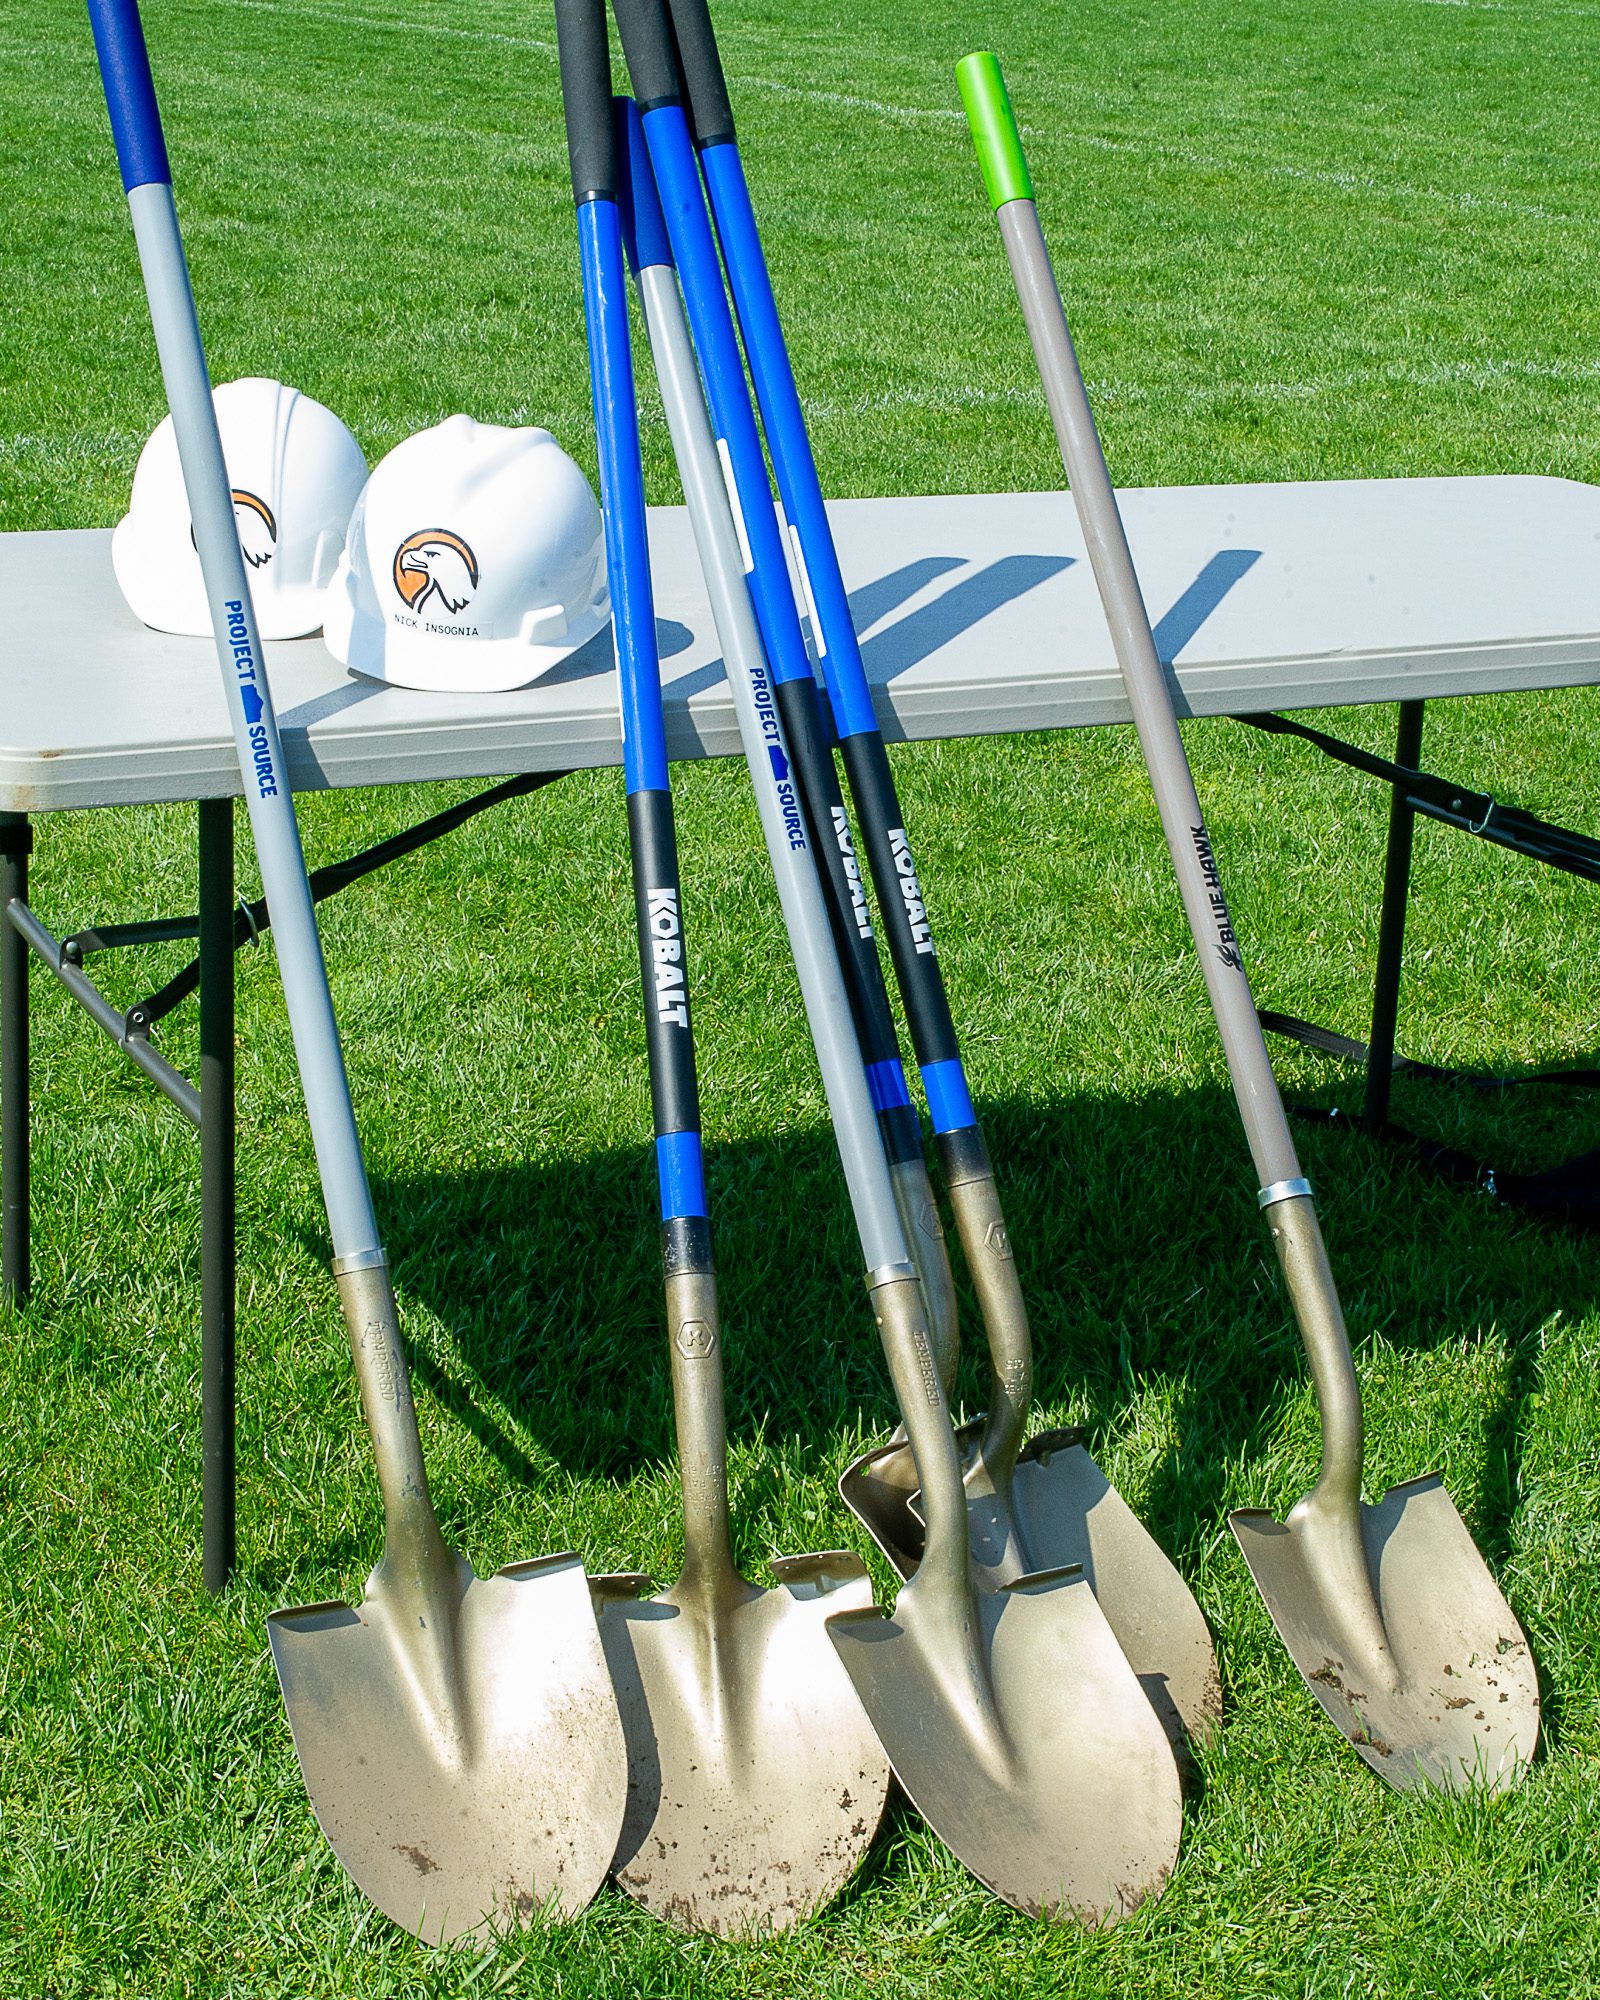 Officials had a ground breaking ceremony for the new artificial turf field at Bethlehem High School.